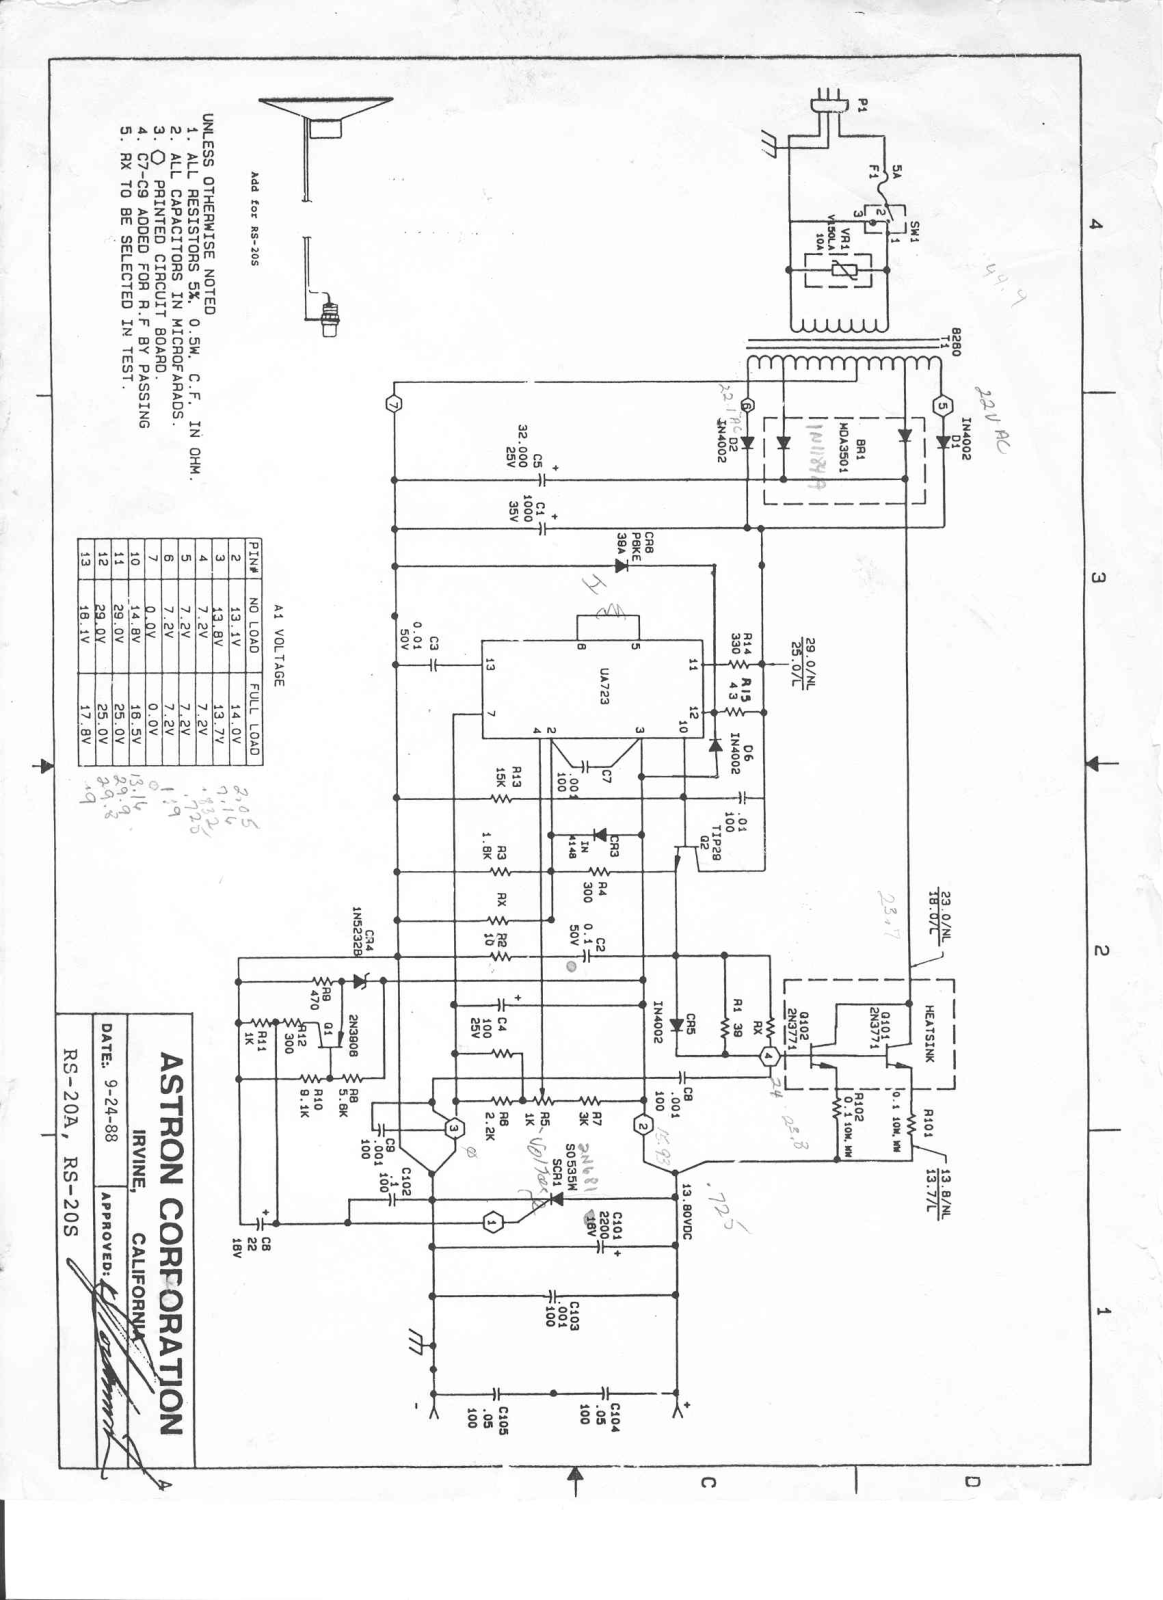 Astron rs20a schematic